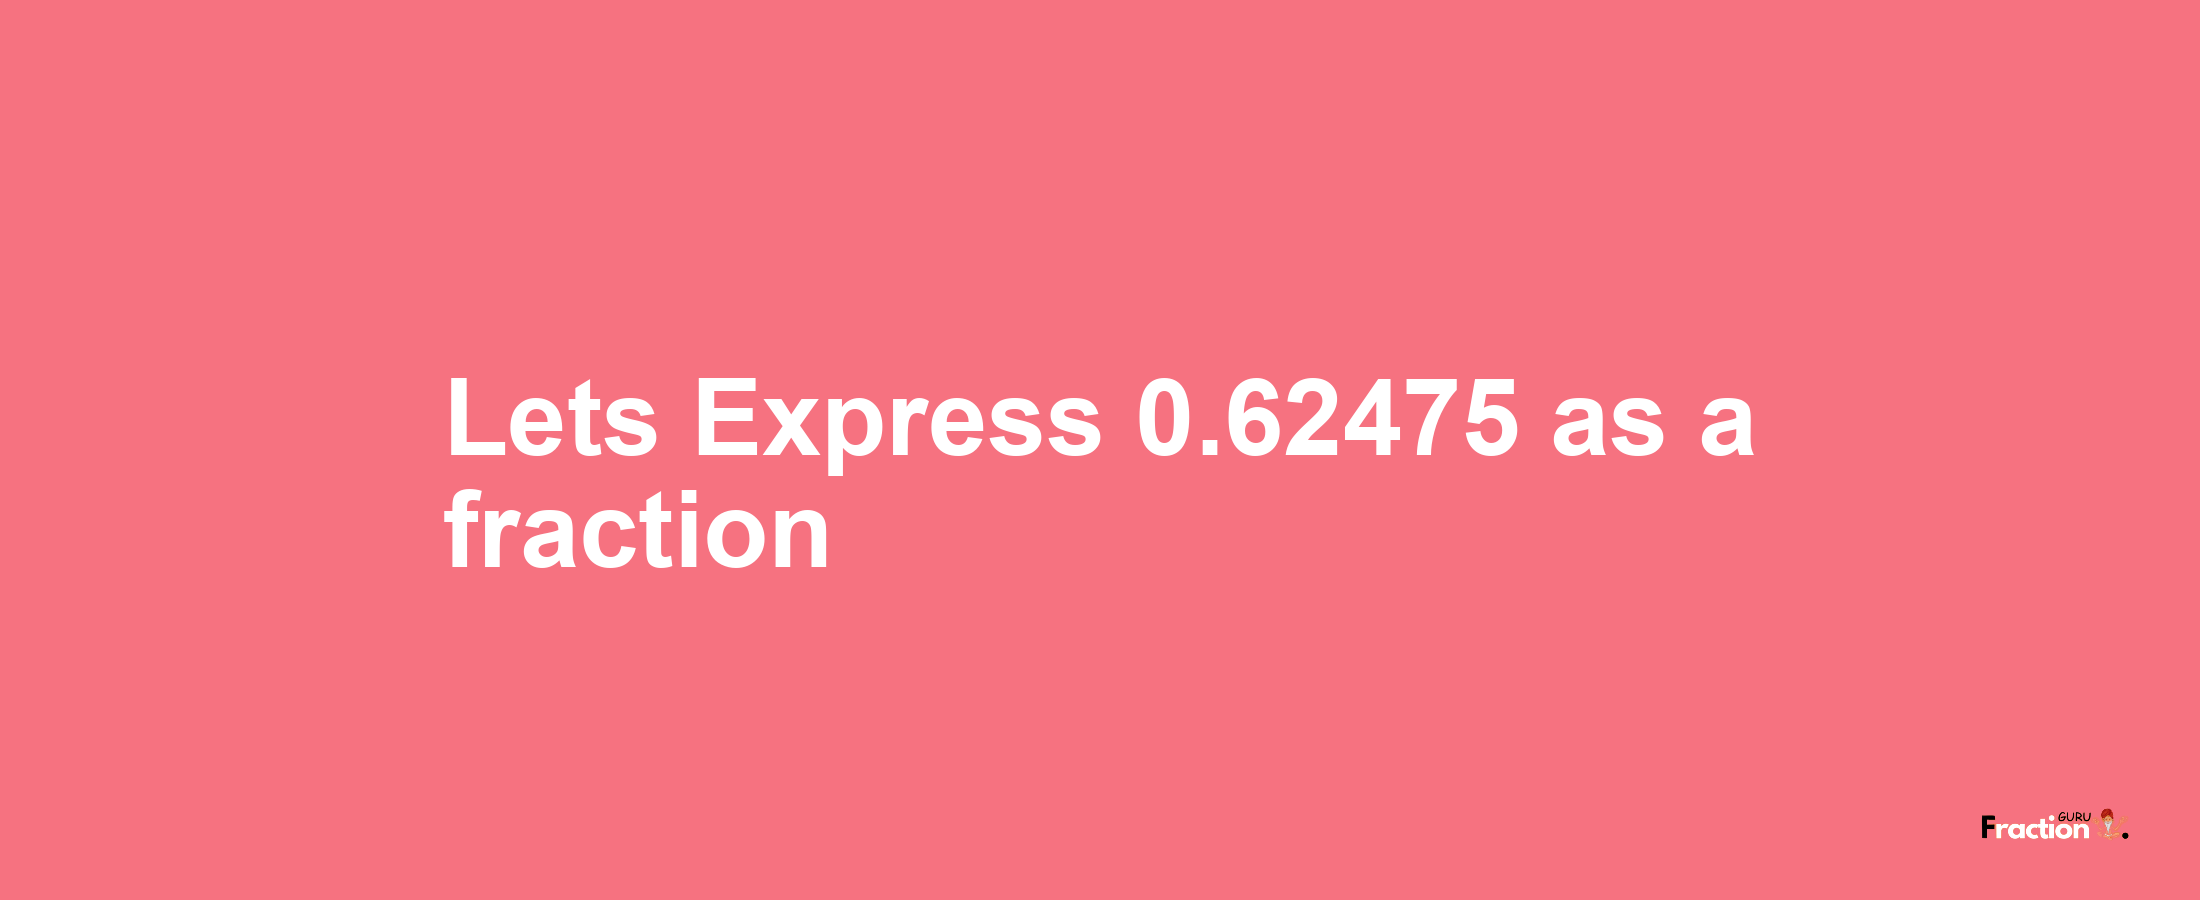 Lets Express 0.62475 as afraction